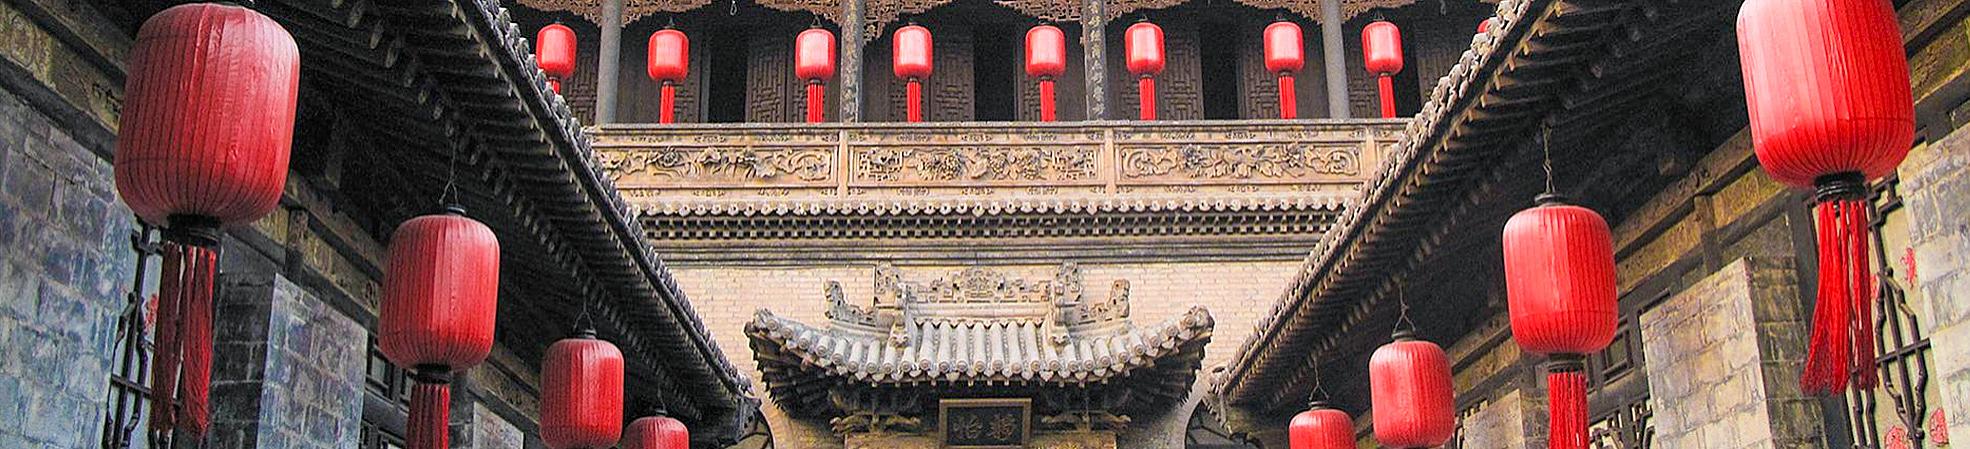 What to See and Where Visitors would Go in Pingyao